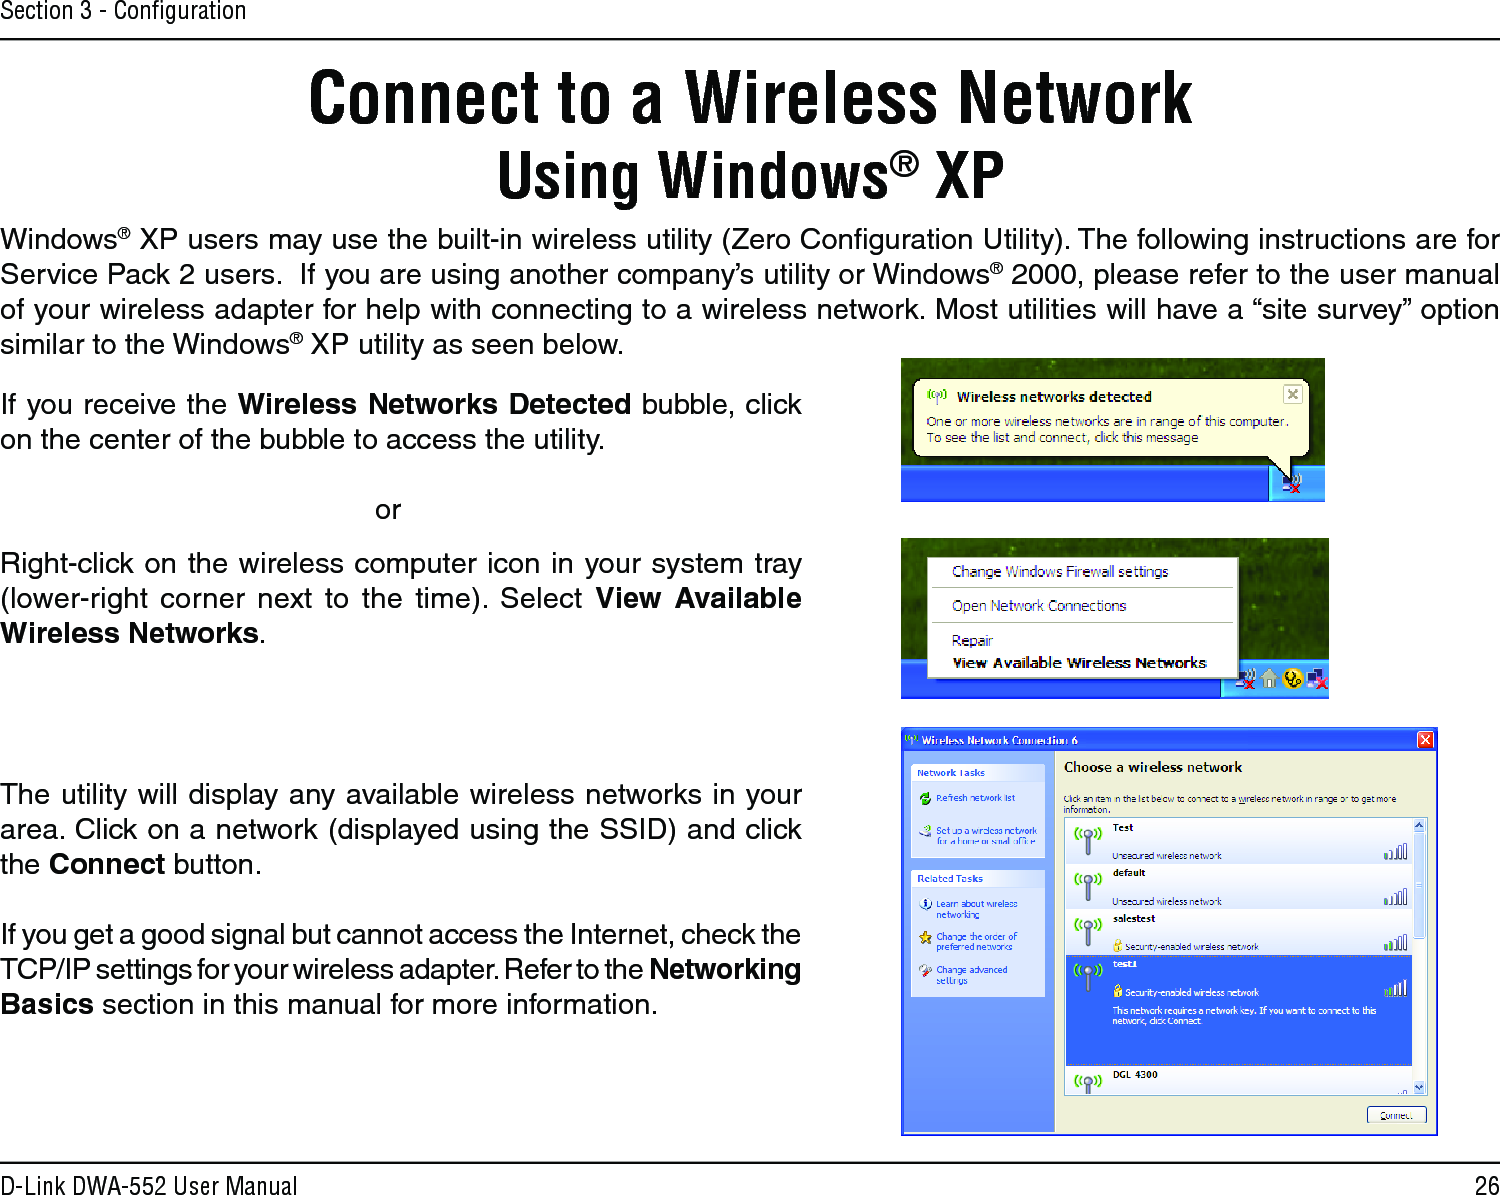 26D-Link DWA-552 User ManualSection 3 - ConﬁgurationConnect to a Wireless NetworkUsing Windows® XPWindows® XP users may use the built-in wireless utility (Zero Conﬁguration Utility). The following instructions are for Service Pack 2 users.  If you are using another company’s utility or Windows® 2000, please refer to the user manual of your wireless adapter for help with connecting to a wireless network. Most utilities will have a “site survey” option similar to the Windows® XP utility as seen below.Right-click on the wireless computer icon in your system tray (lower-right  corner  next  to  the  time).  Select  View  Available Wireless Networks.If you receive the Wireless Networks Detected bubble, click on the center of the bubble to access the utility.     orThe utility will display any available wireless networks in your area. Click on a network (displayed using the SSID) and click the Connect button.If you get a good signal but cannot access the Internet, check the TCP/IP settings for your wireless adapter. Refer to the Networking Basics section in this manual for more information.